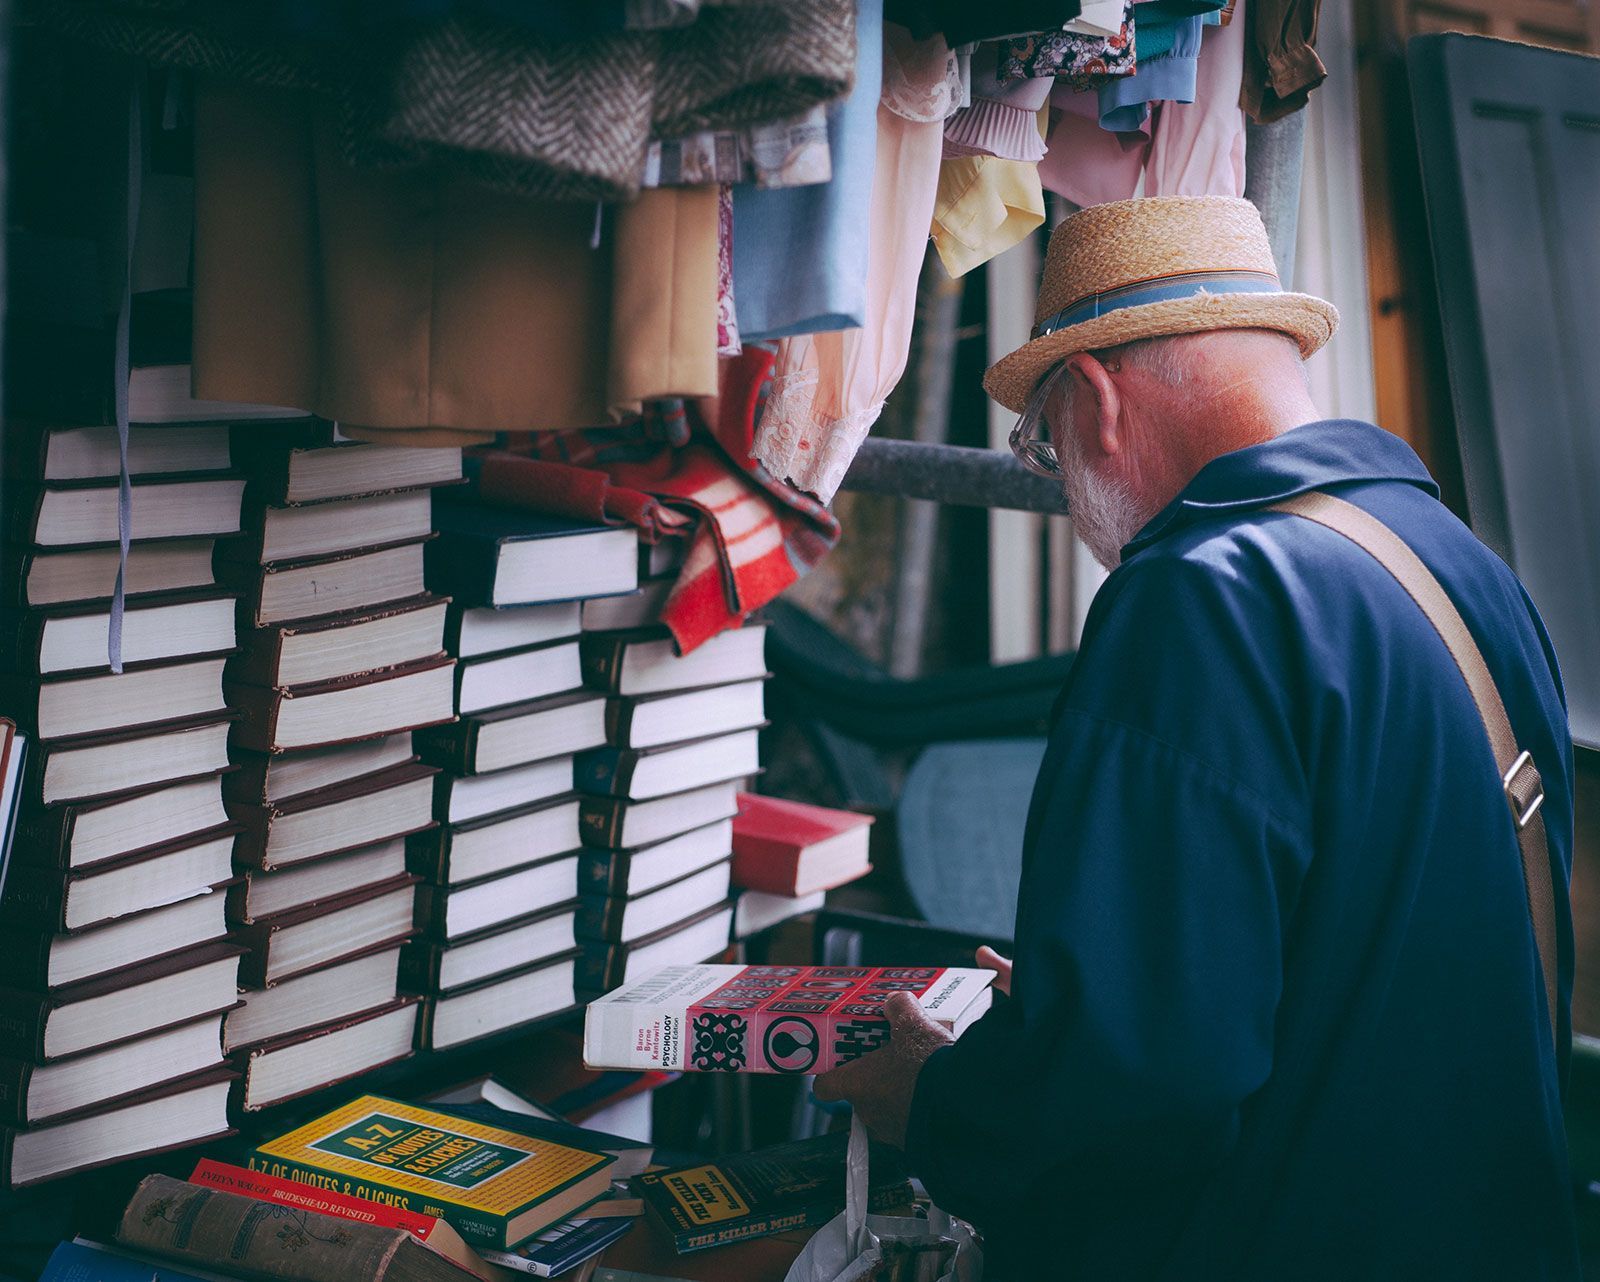 A man wearing a straw hat is reading a book